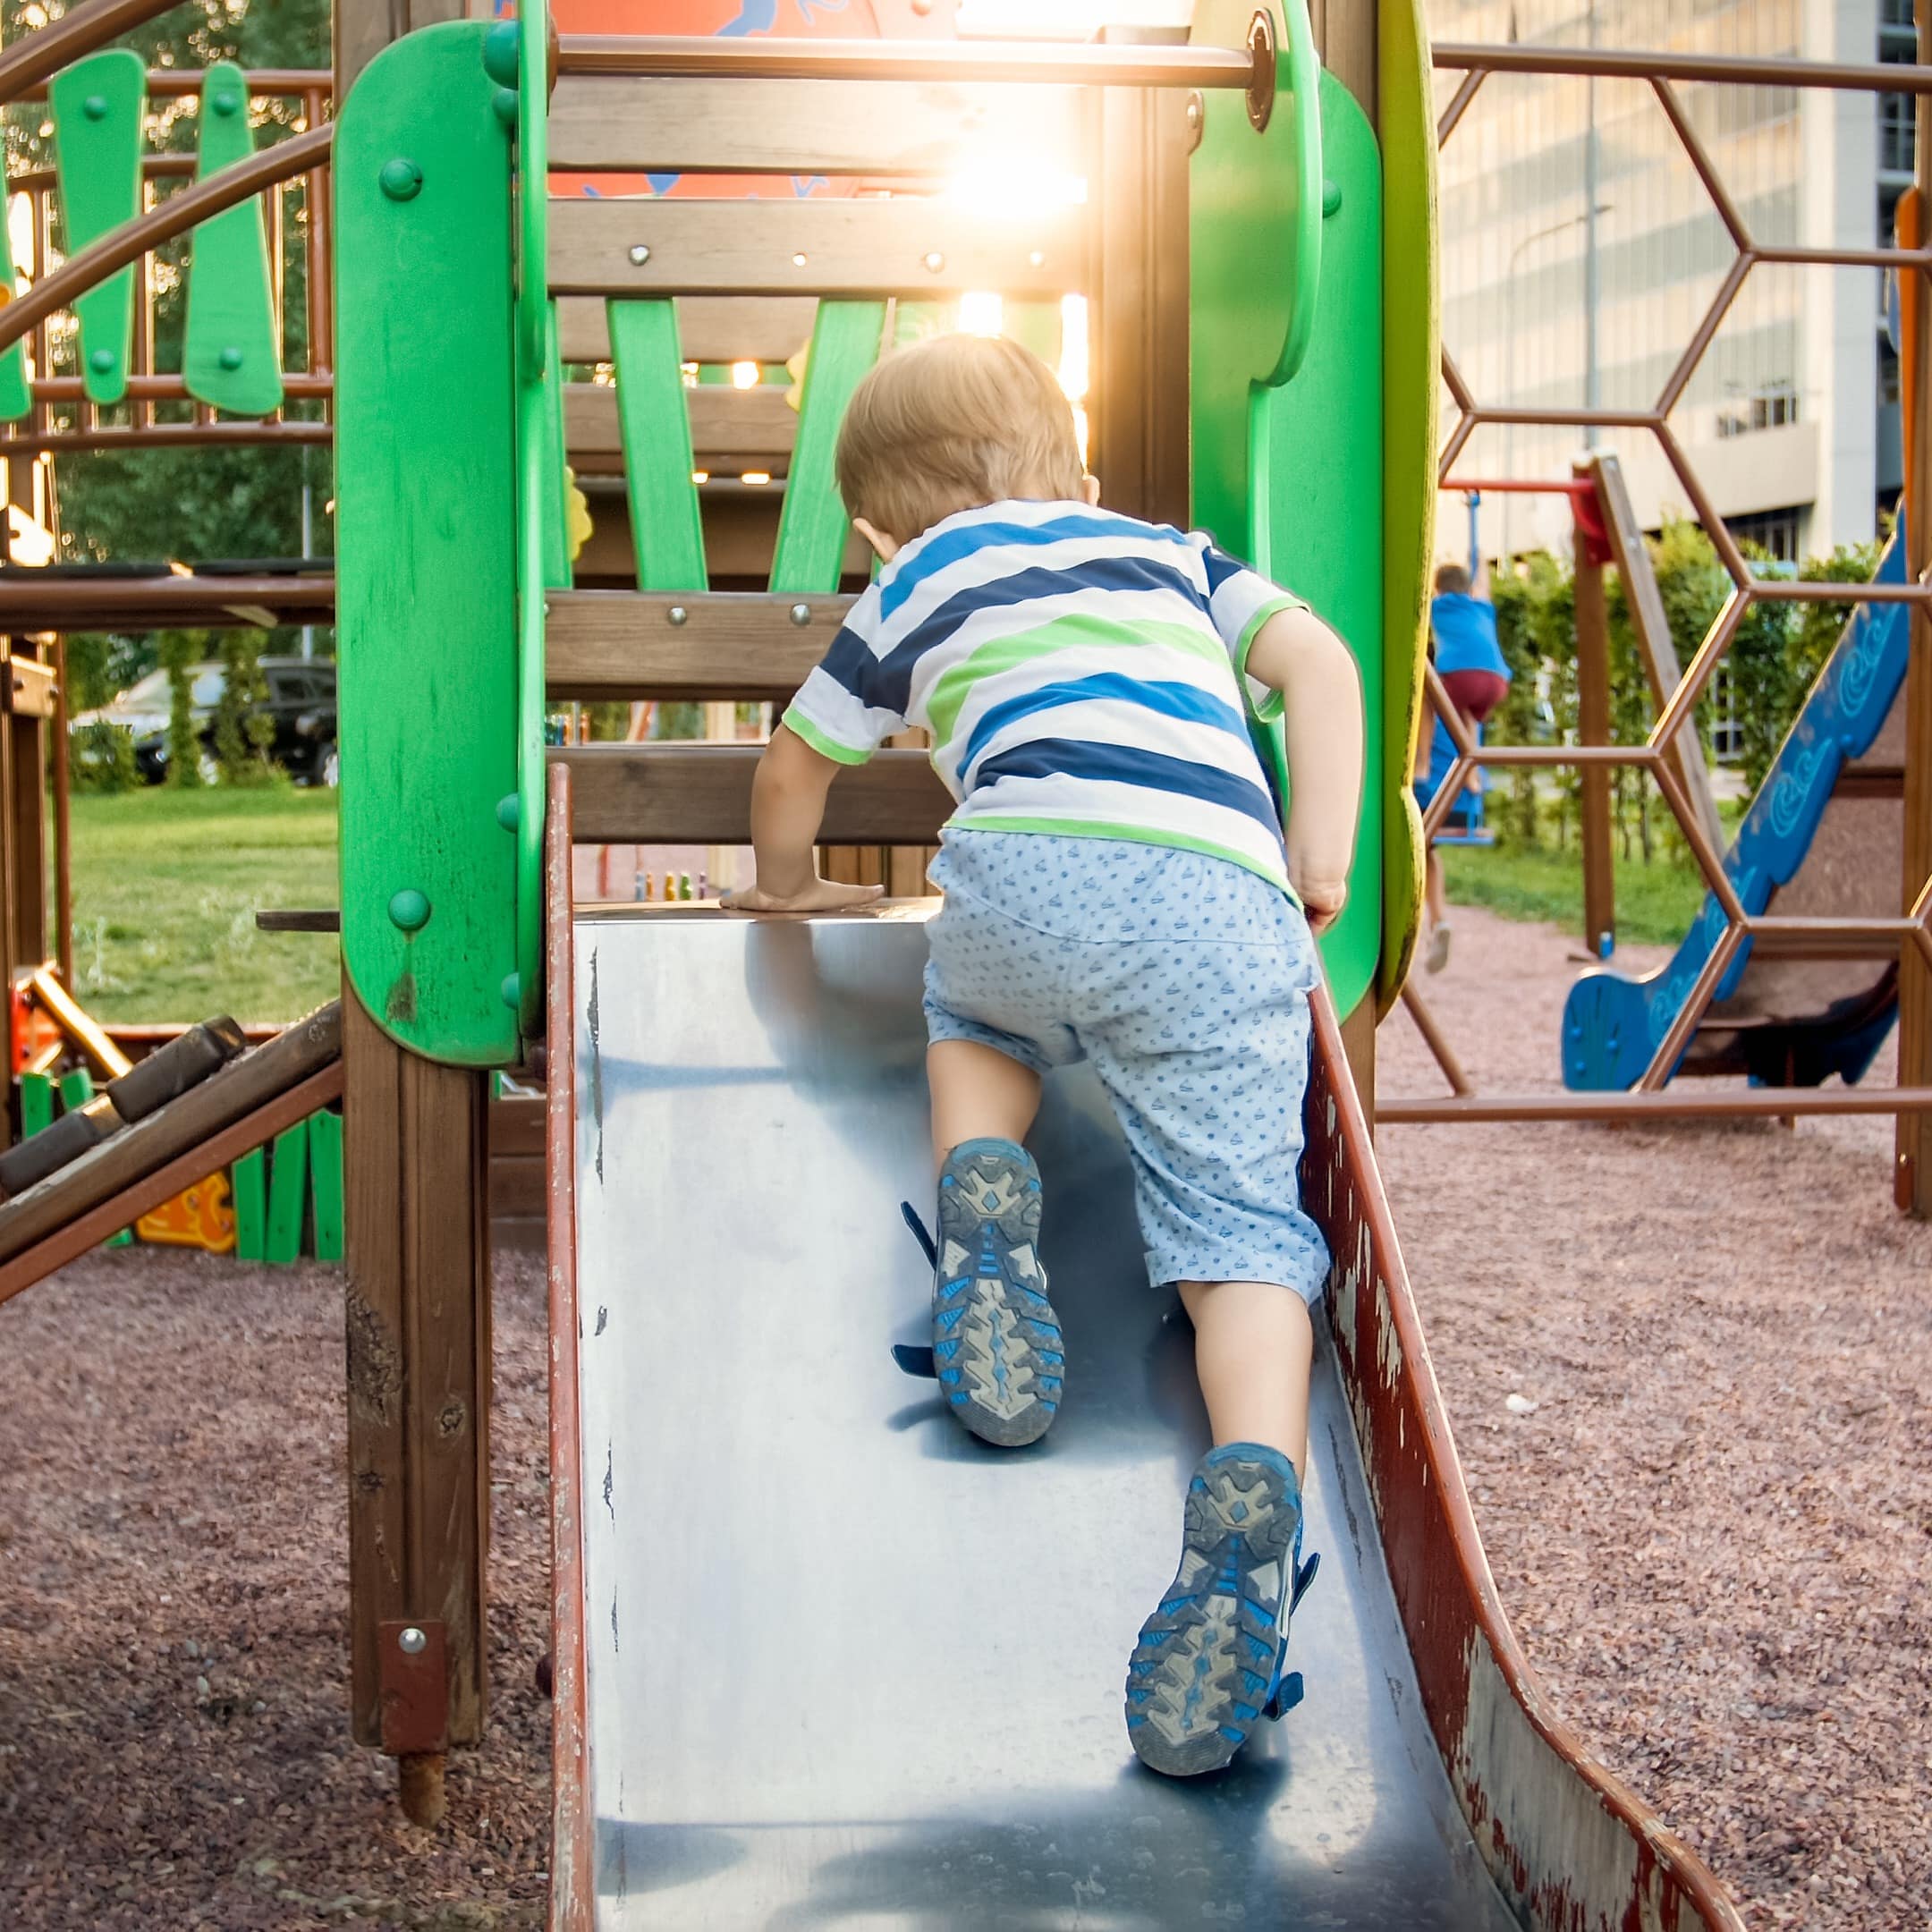 Toddler climbing up a slide at the playground